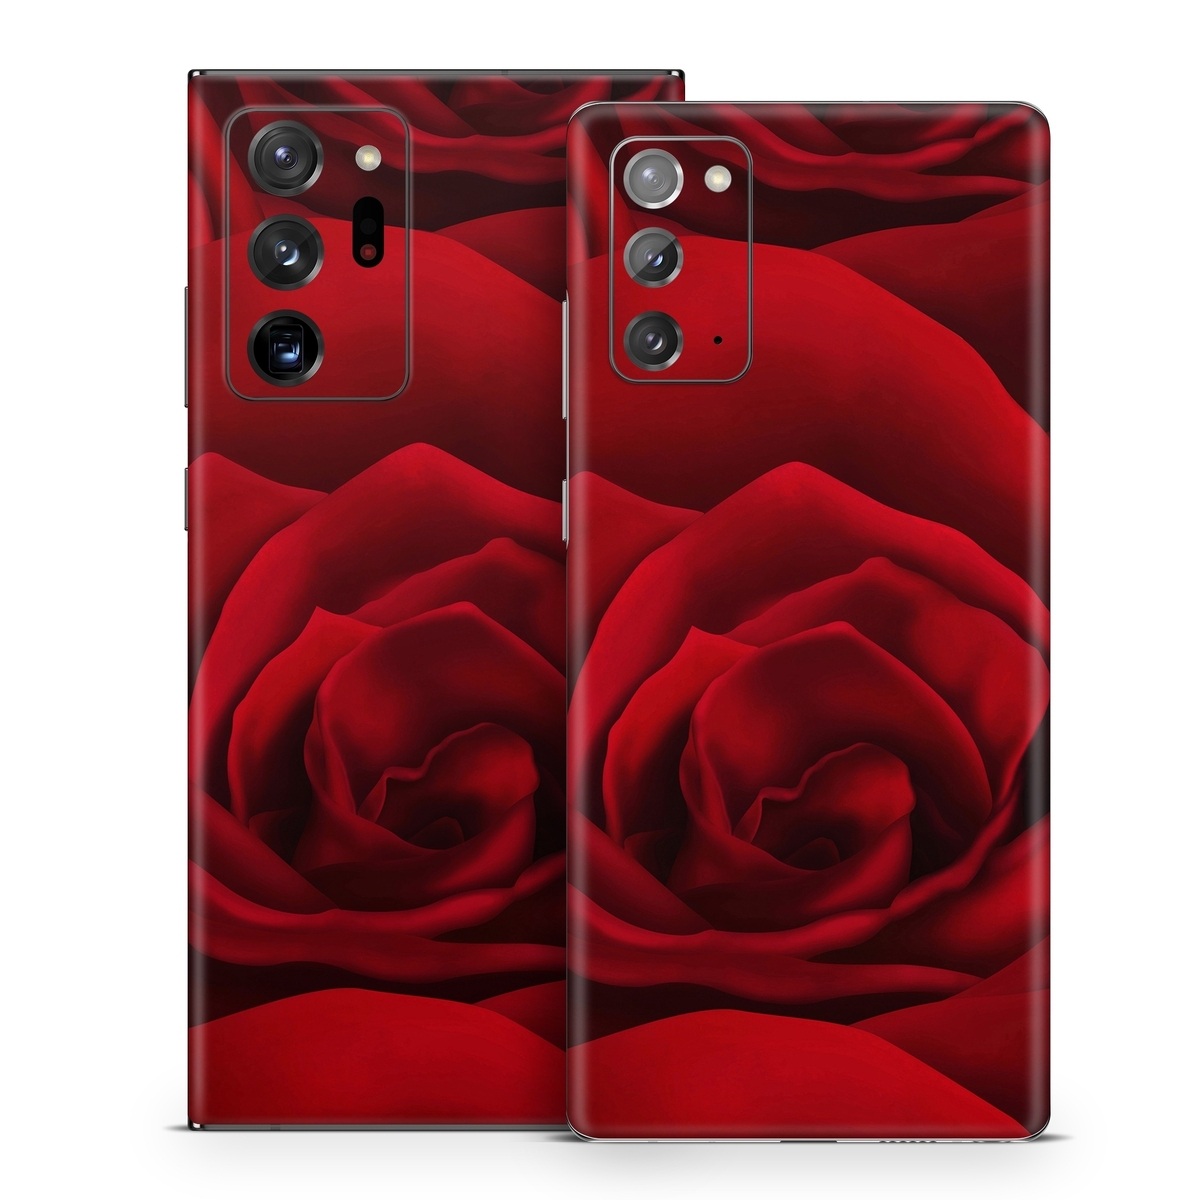 Samsung Galaxy Note 20 Series Skin design of Red, Garden roses, Rose, Petal, Flower, Nature, Floribunda, Rose family, Close-up, Plant, with black, red colors